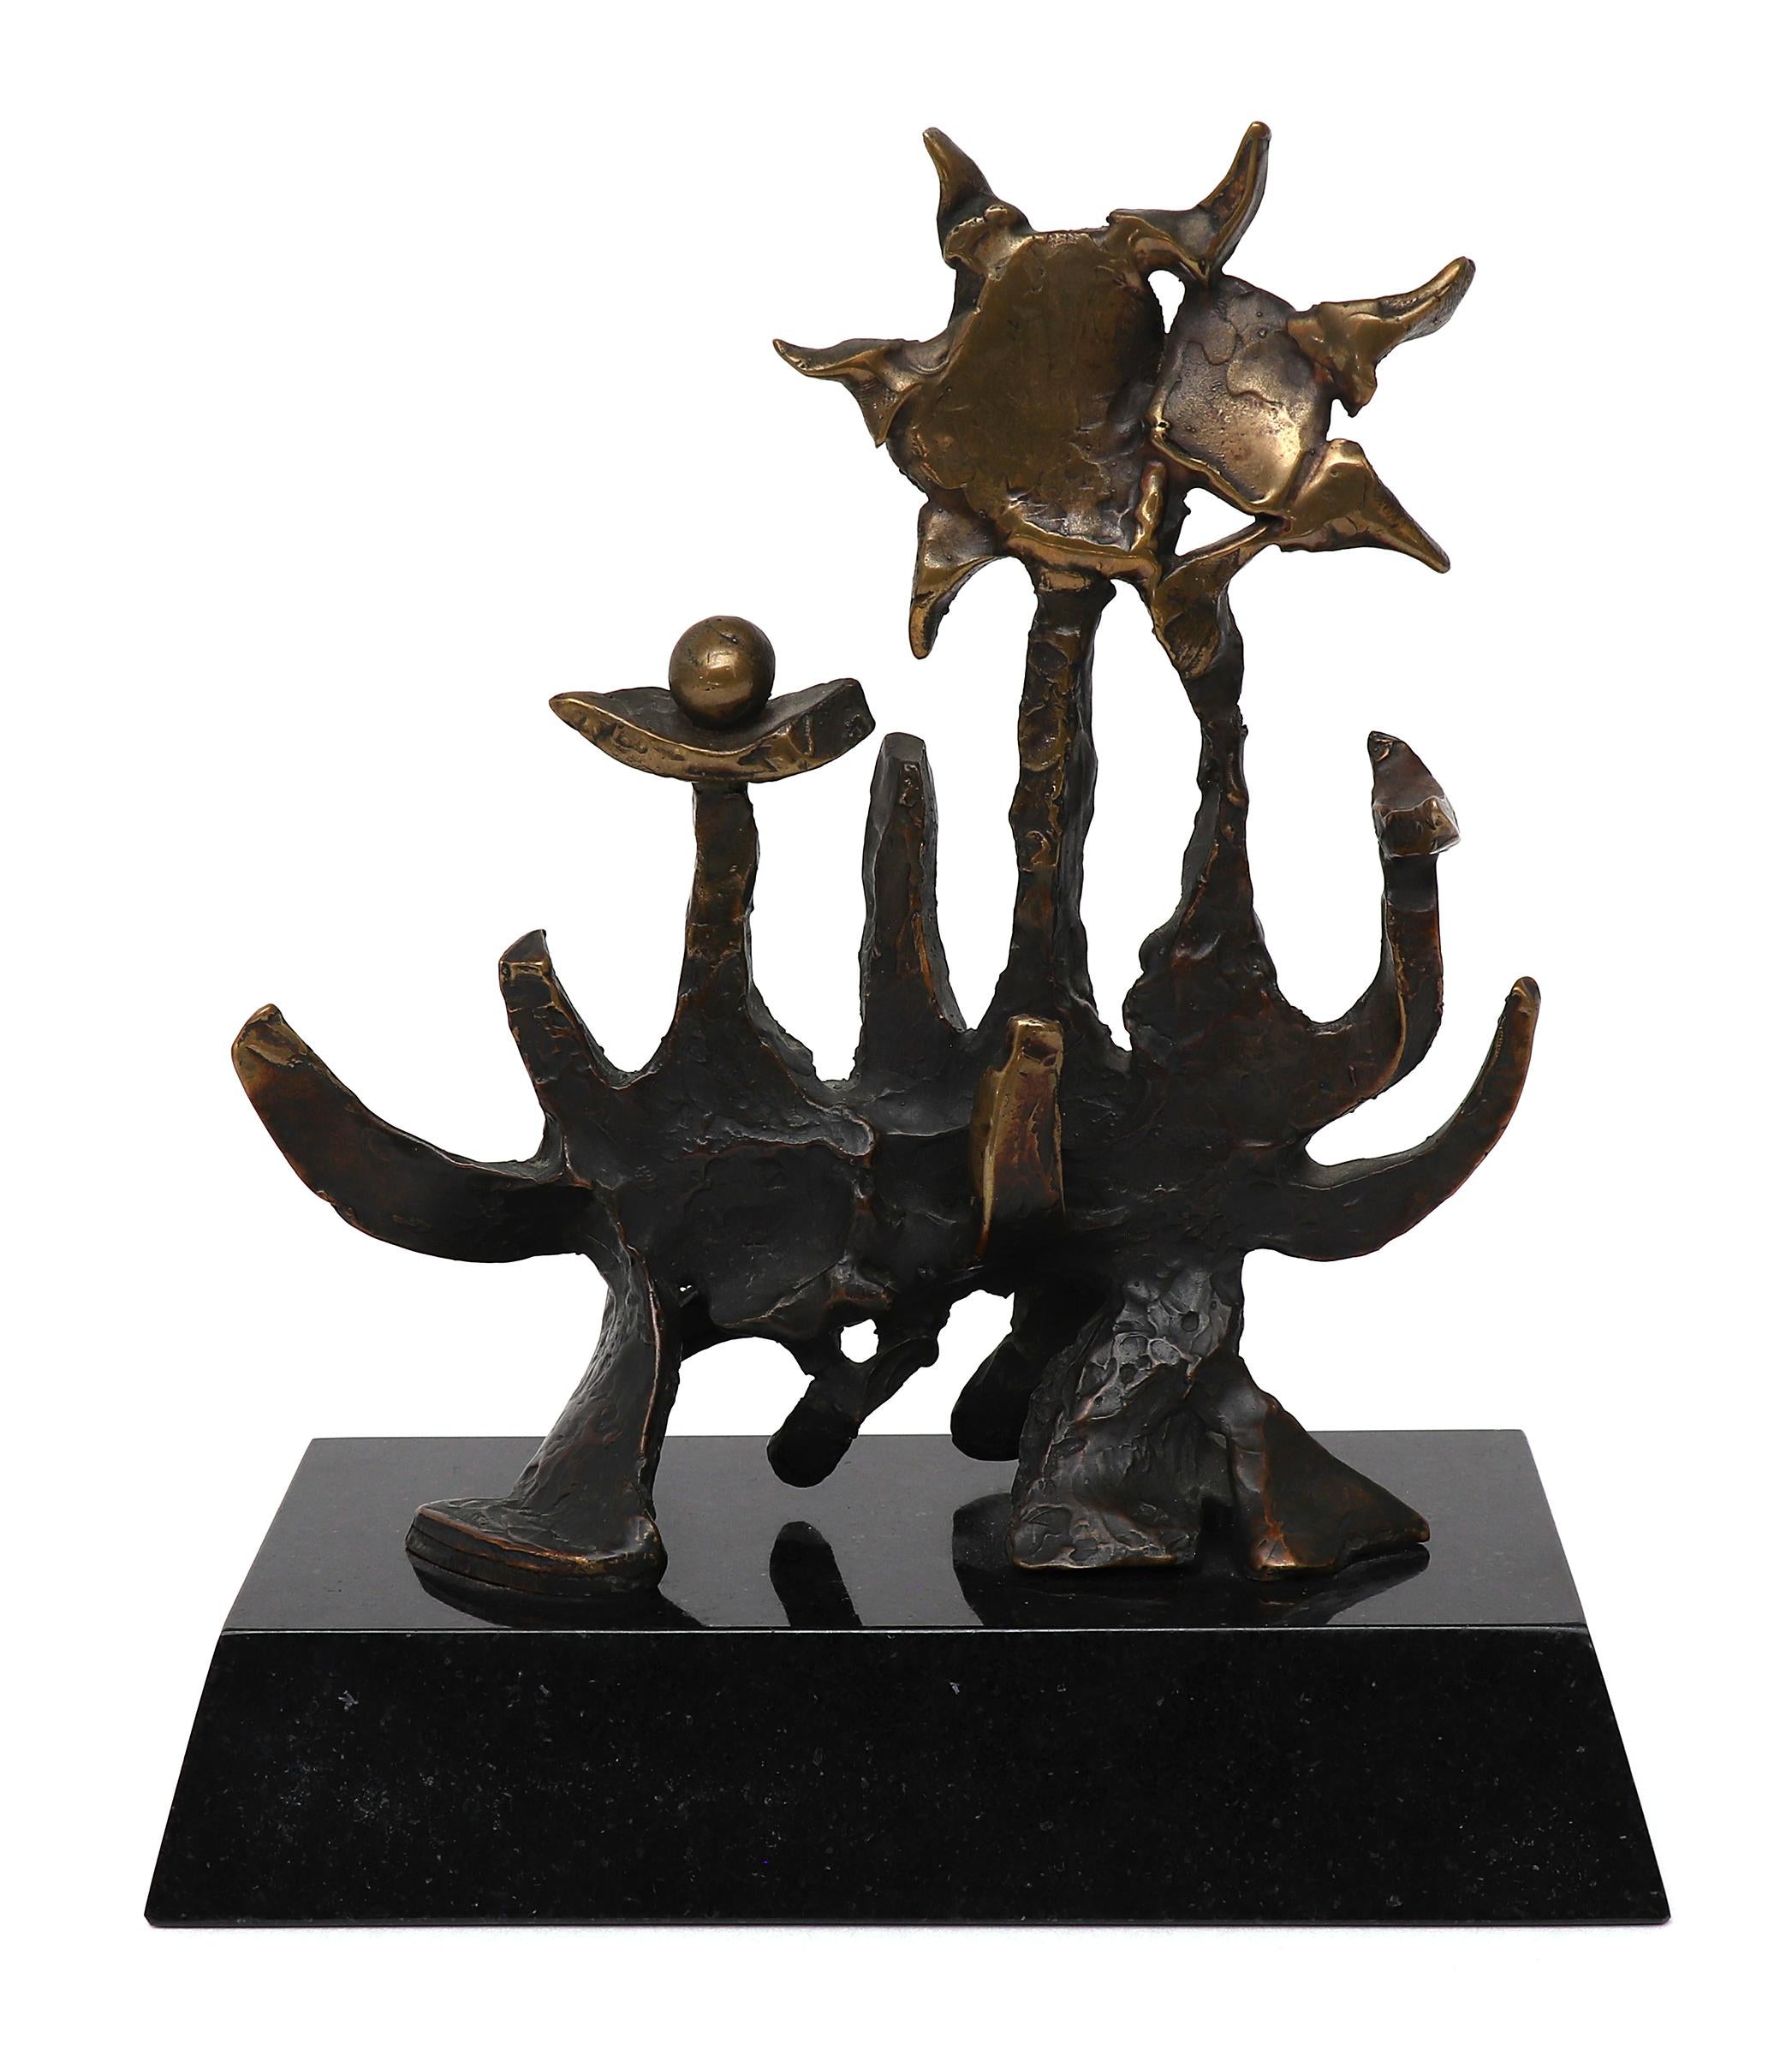 American Modern Abstract Bronze Sculpture on Granite Stand, Edward Chavez